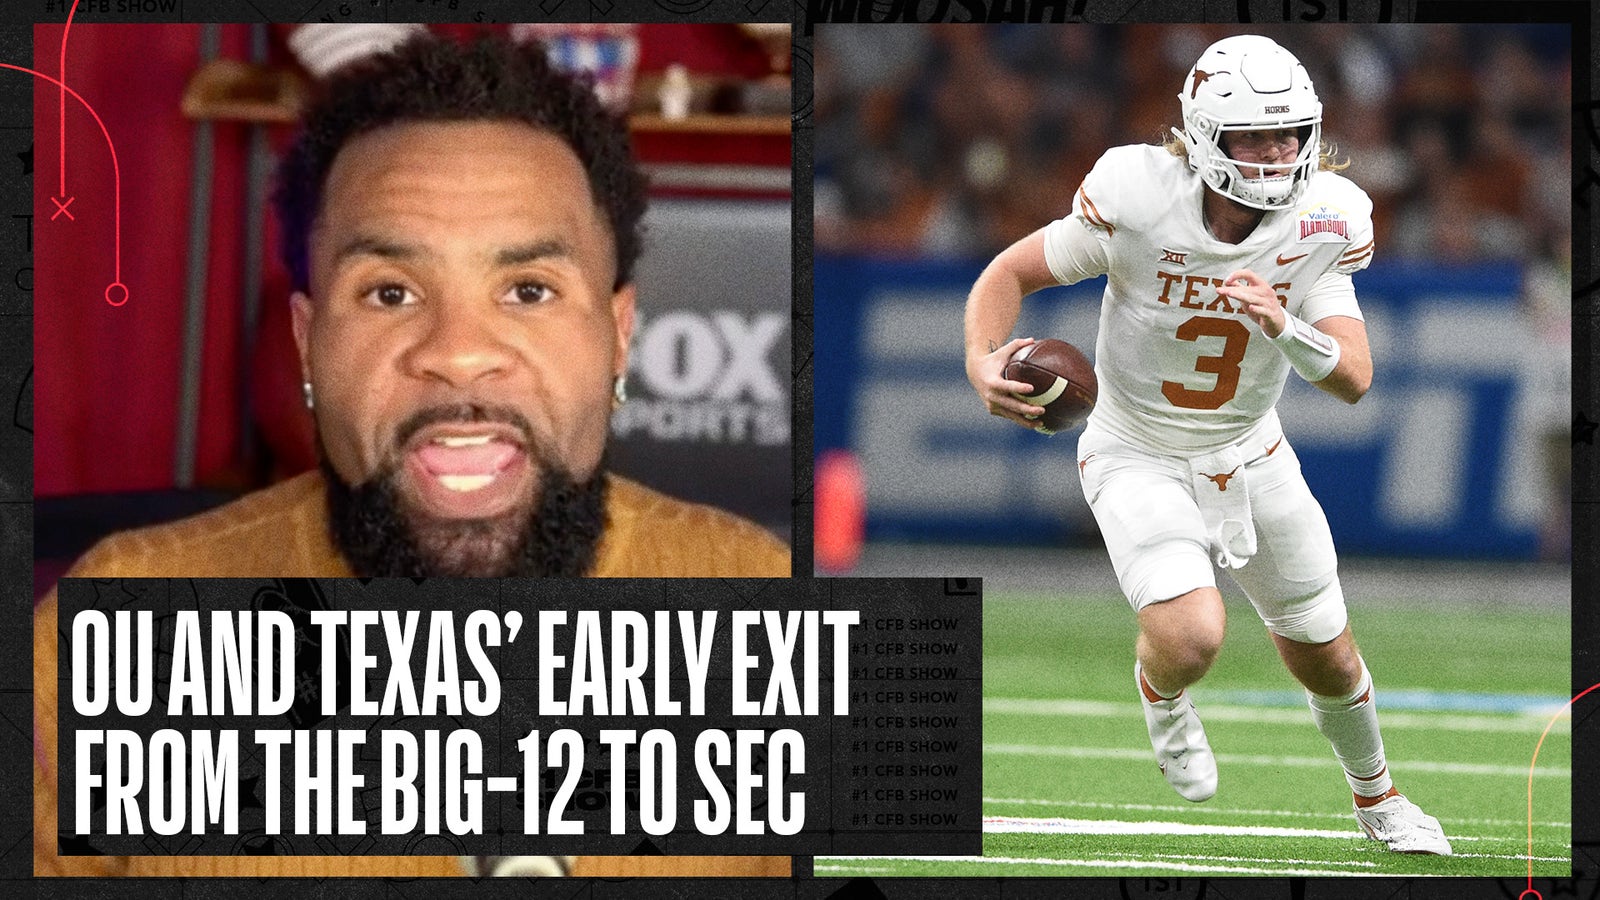 Texas and Oklahoma's early exit from Big 12